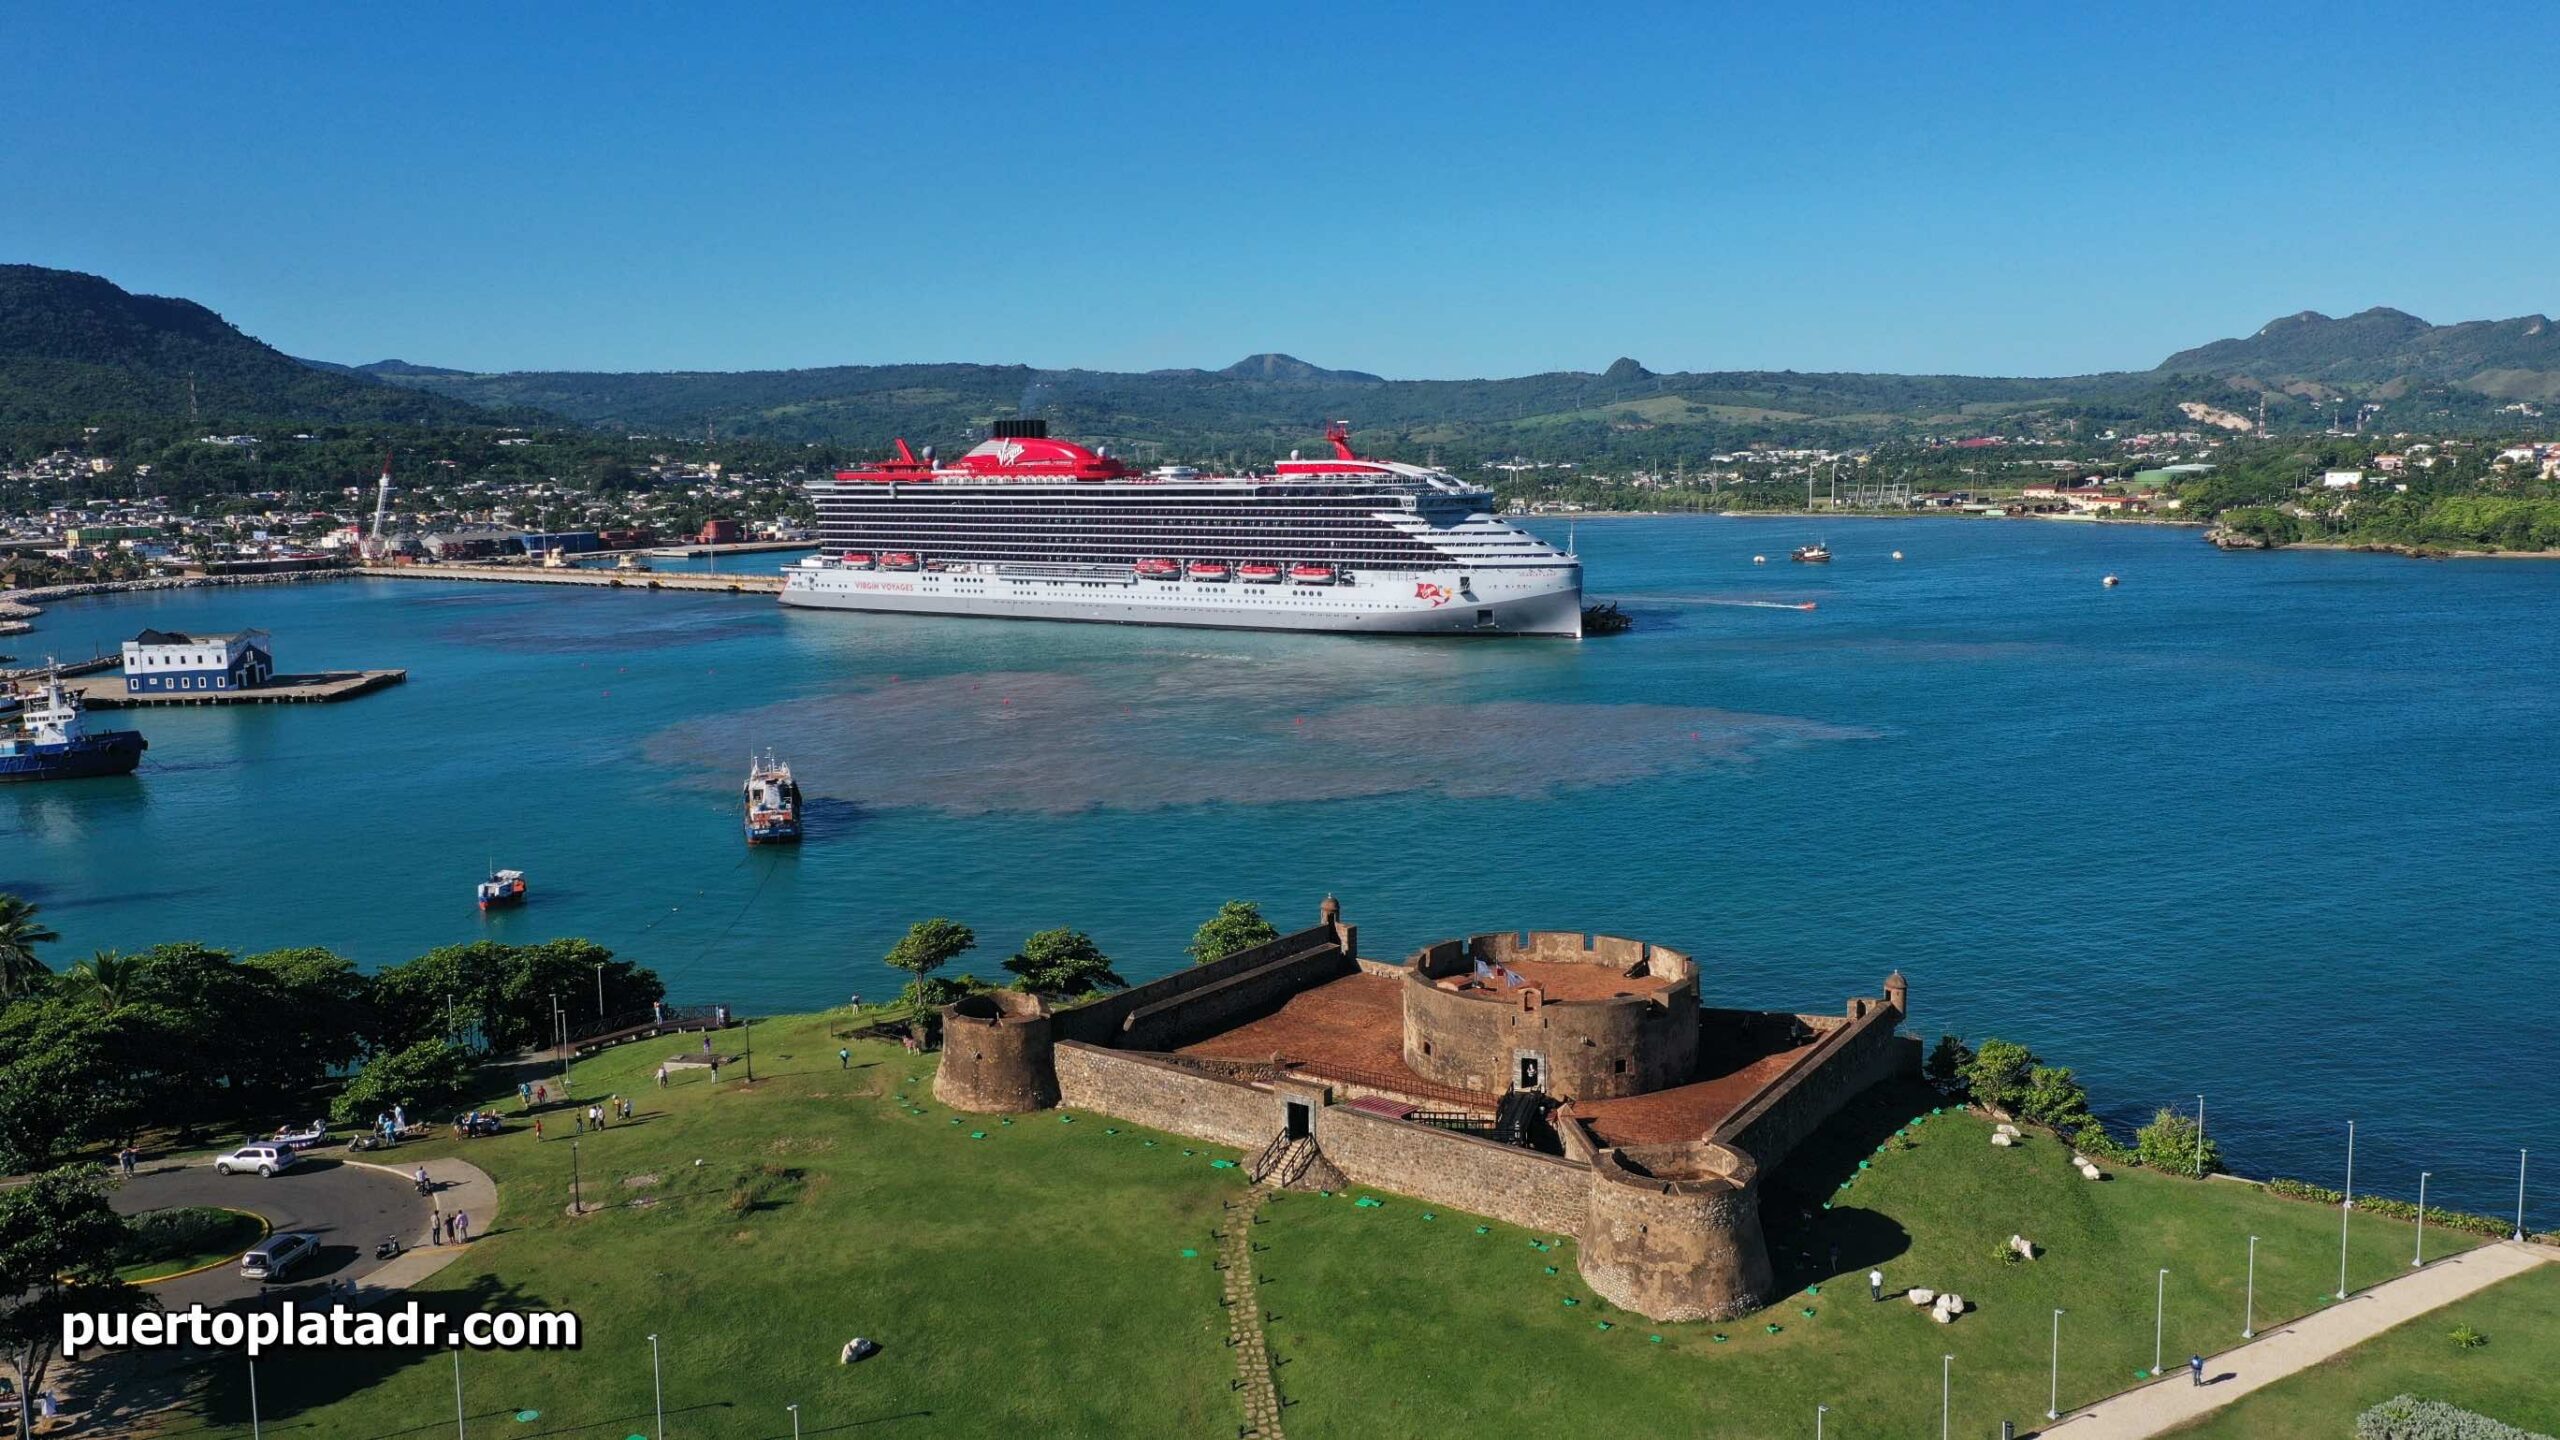 View of Scarlet Lady docked in Taino Bay, and the Fort san Felipe in the foreground